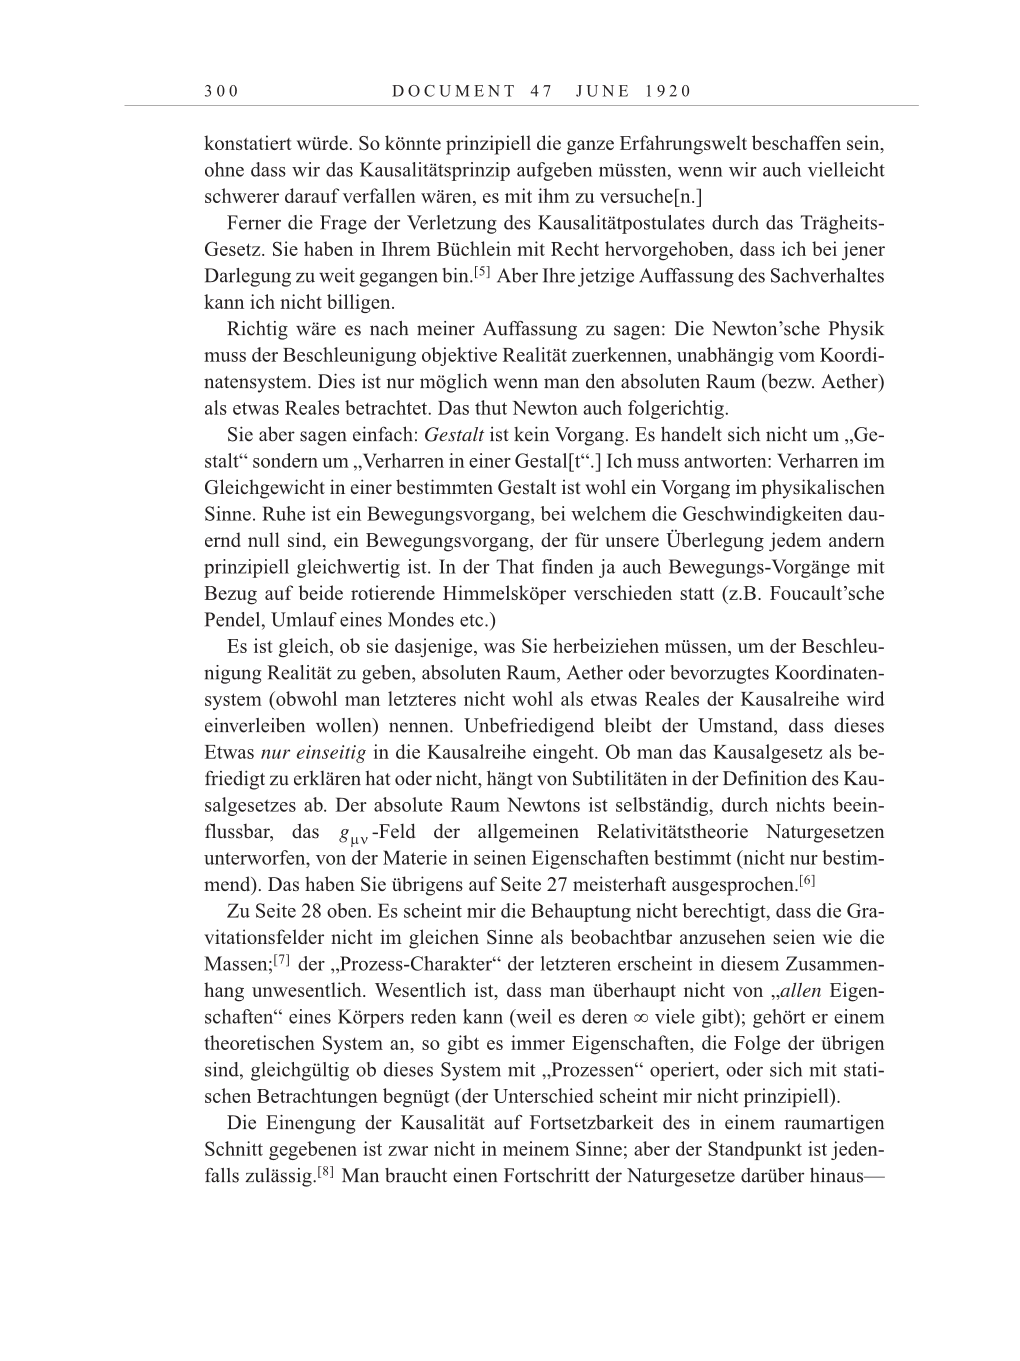 Volume 10: The Berlin Years: Correspondence May-December 1920 / Supplementary Correspondence 1909-1920 page 300